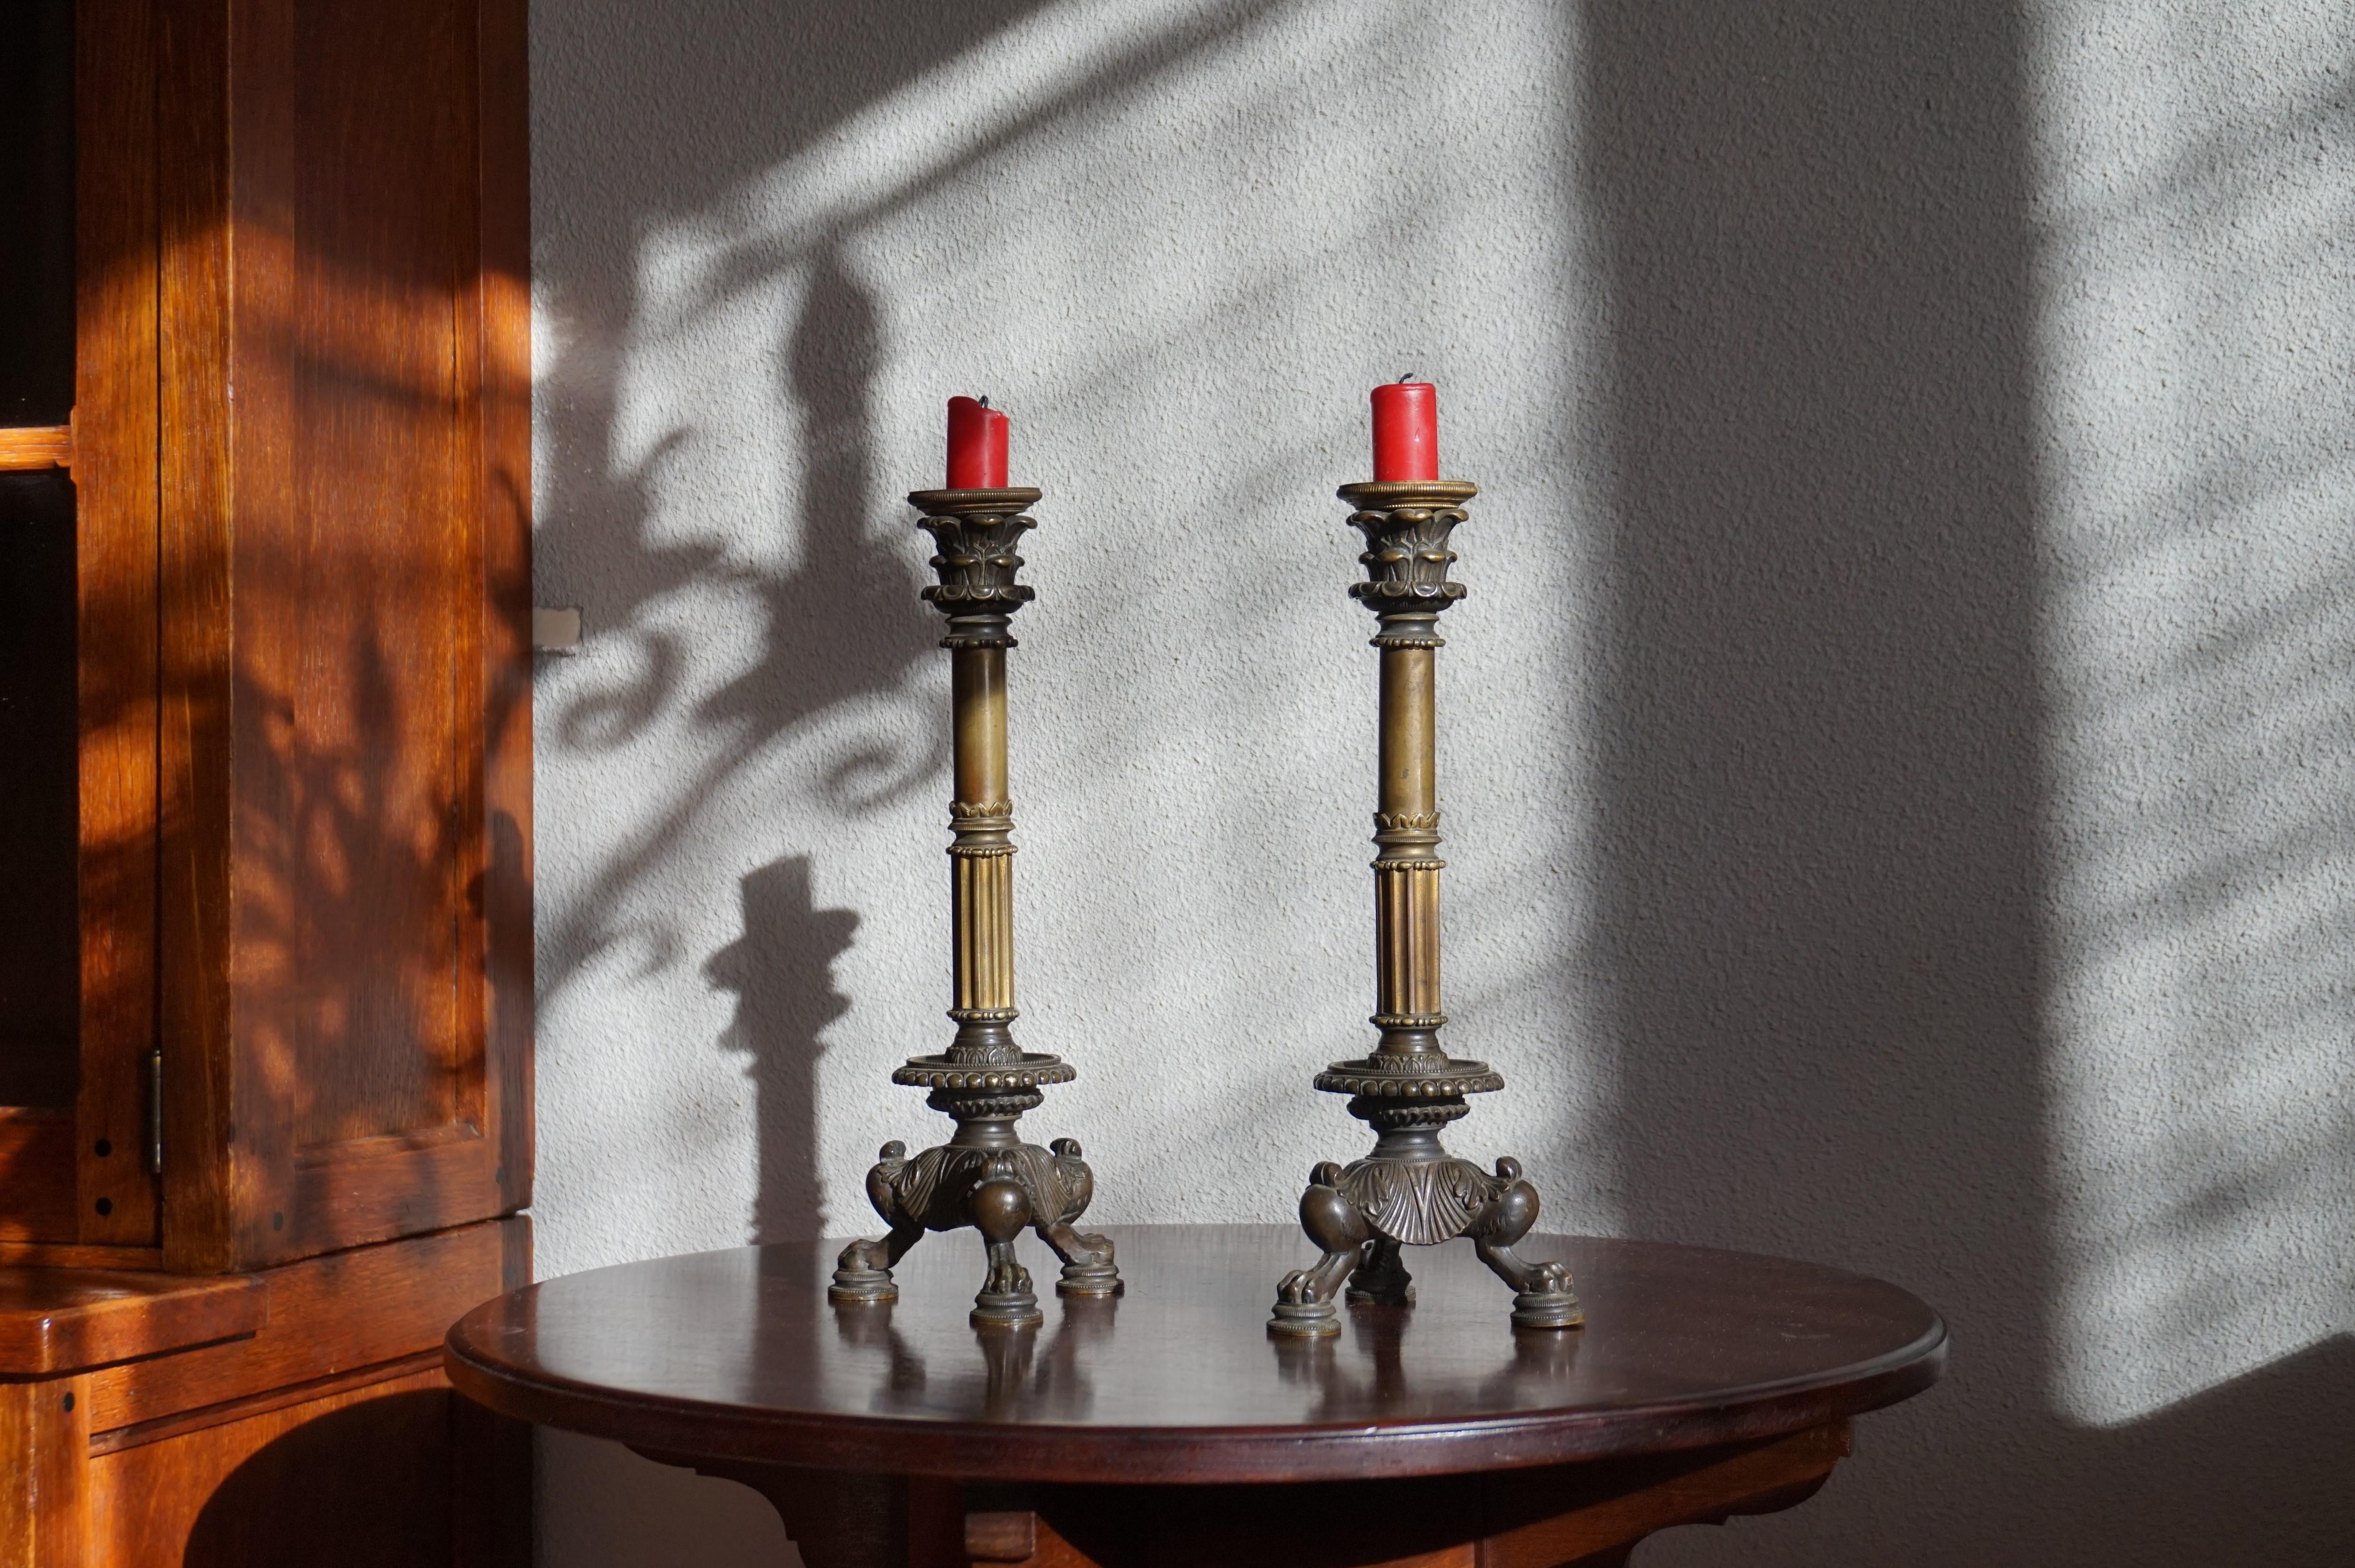 Practical size, antique bronze candleholders with original and removable bobeches.

If you are looking for excellent condition antiques to create the perfect atmosphere at home then this attractive and decorative pair of bronze candlesticks could be